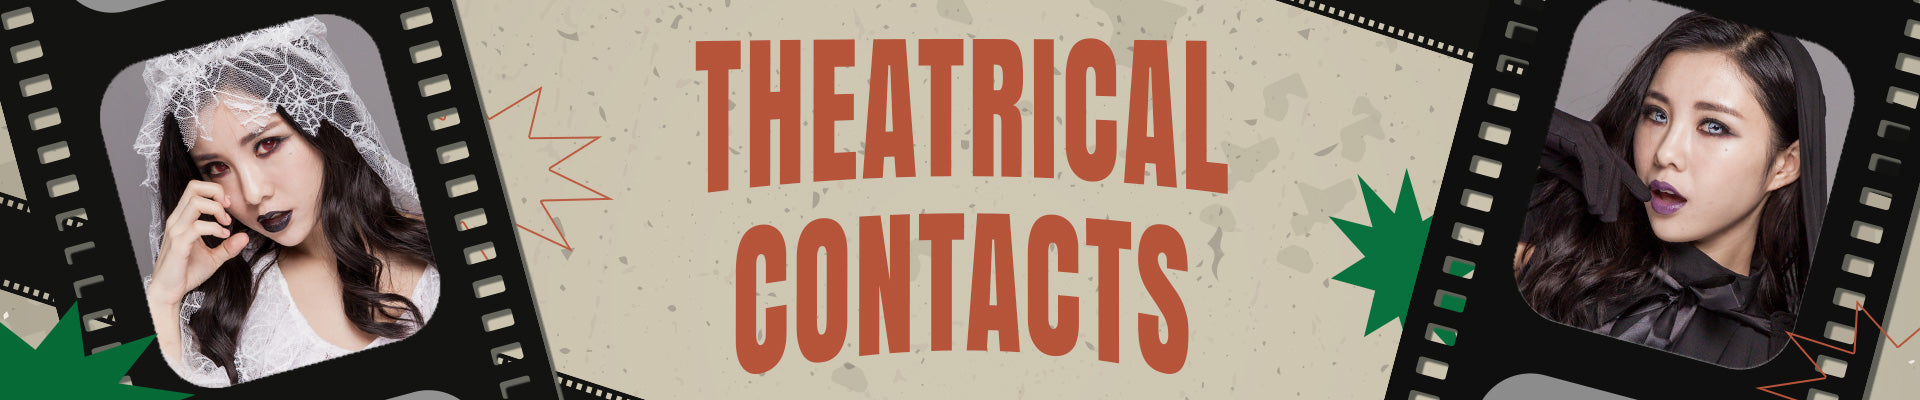 Theatrical Contacts